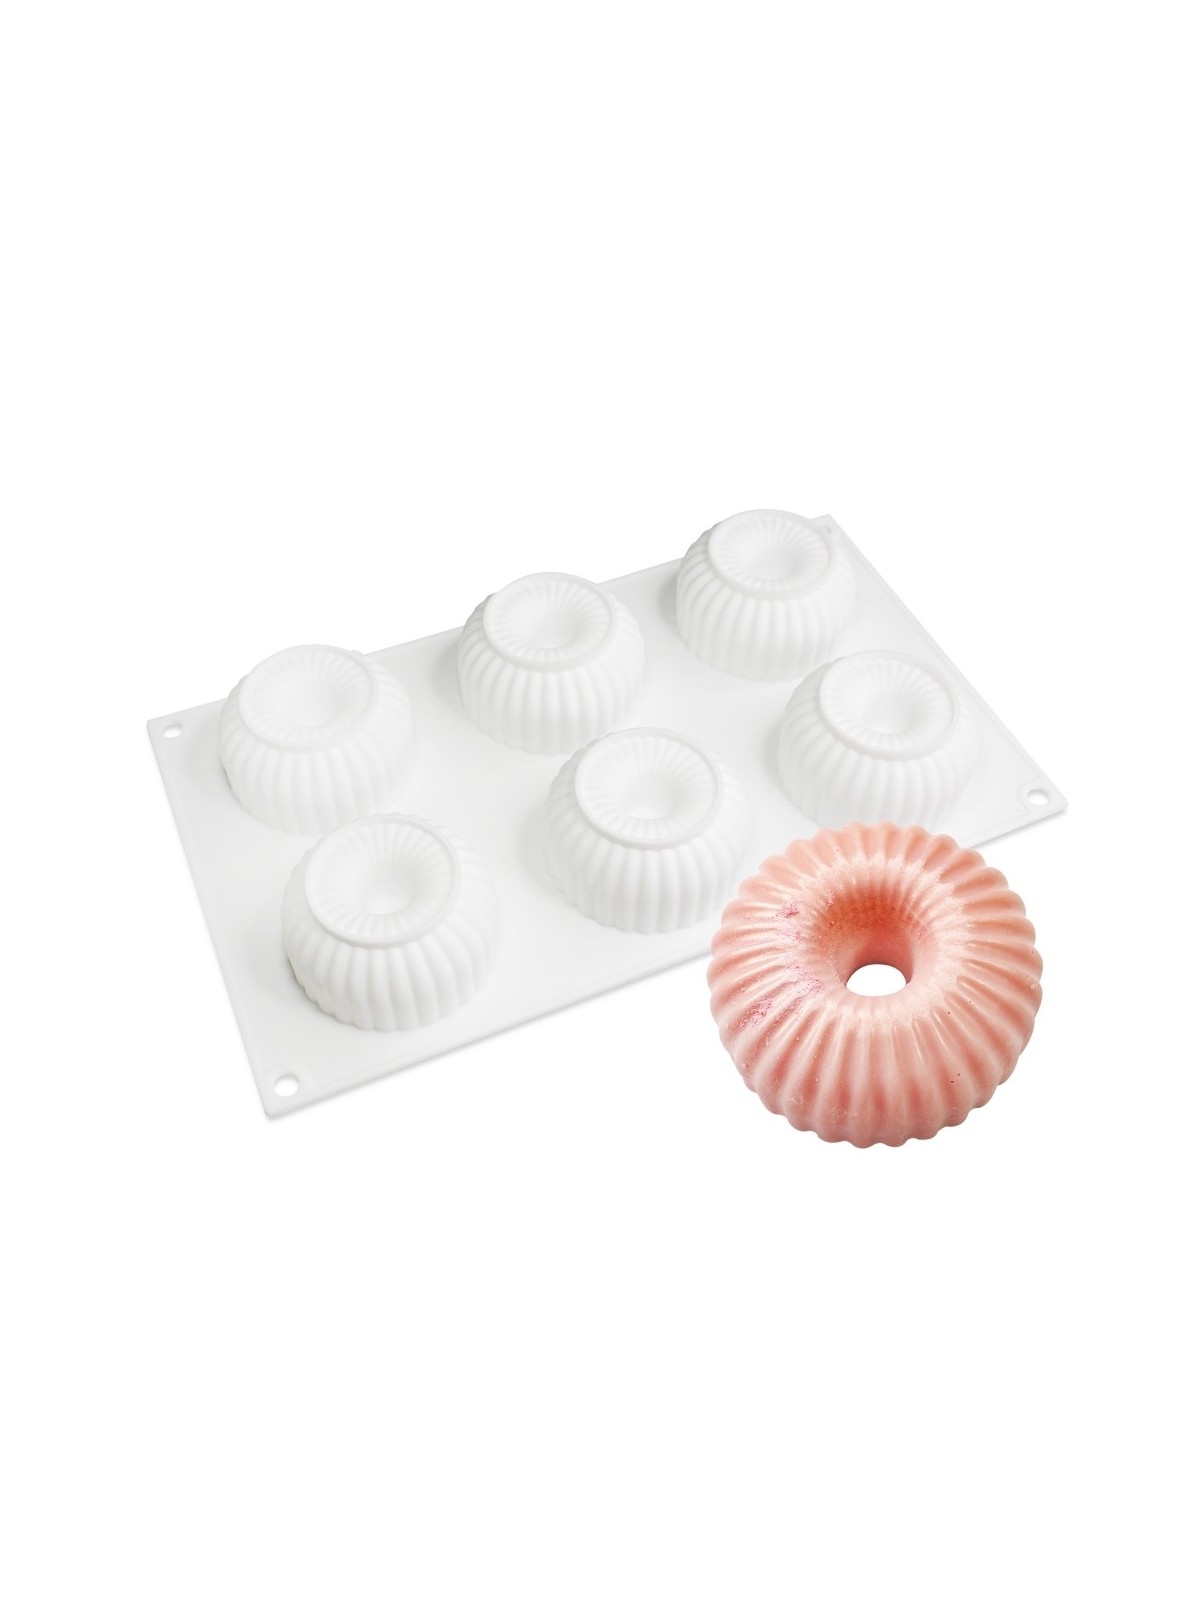 https://www.vypalimti.cz/14775-product_zoom/silicone-mold-ribbed-cakes.jpg